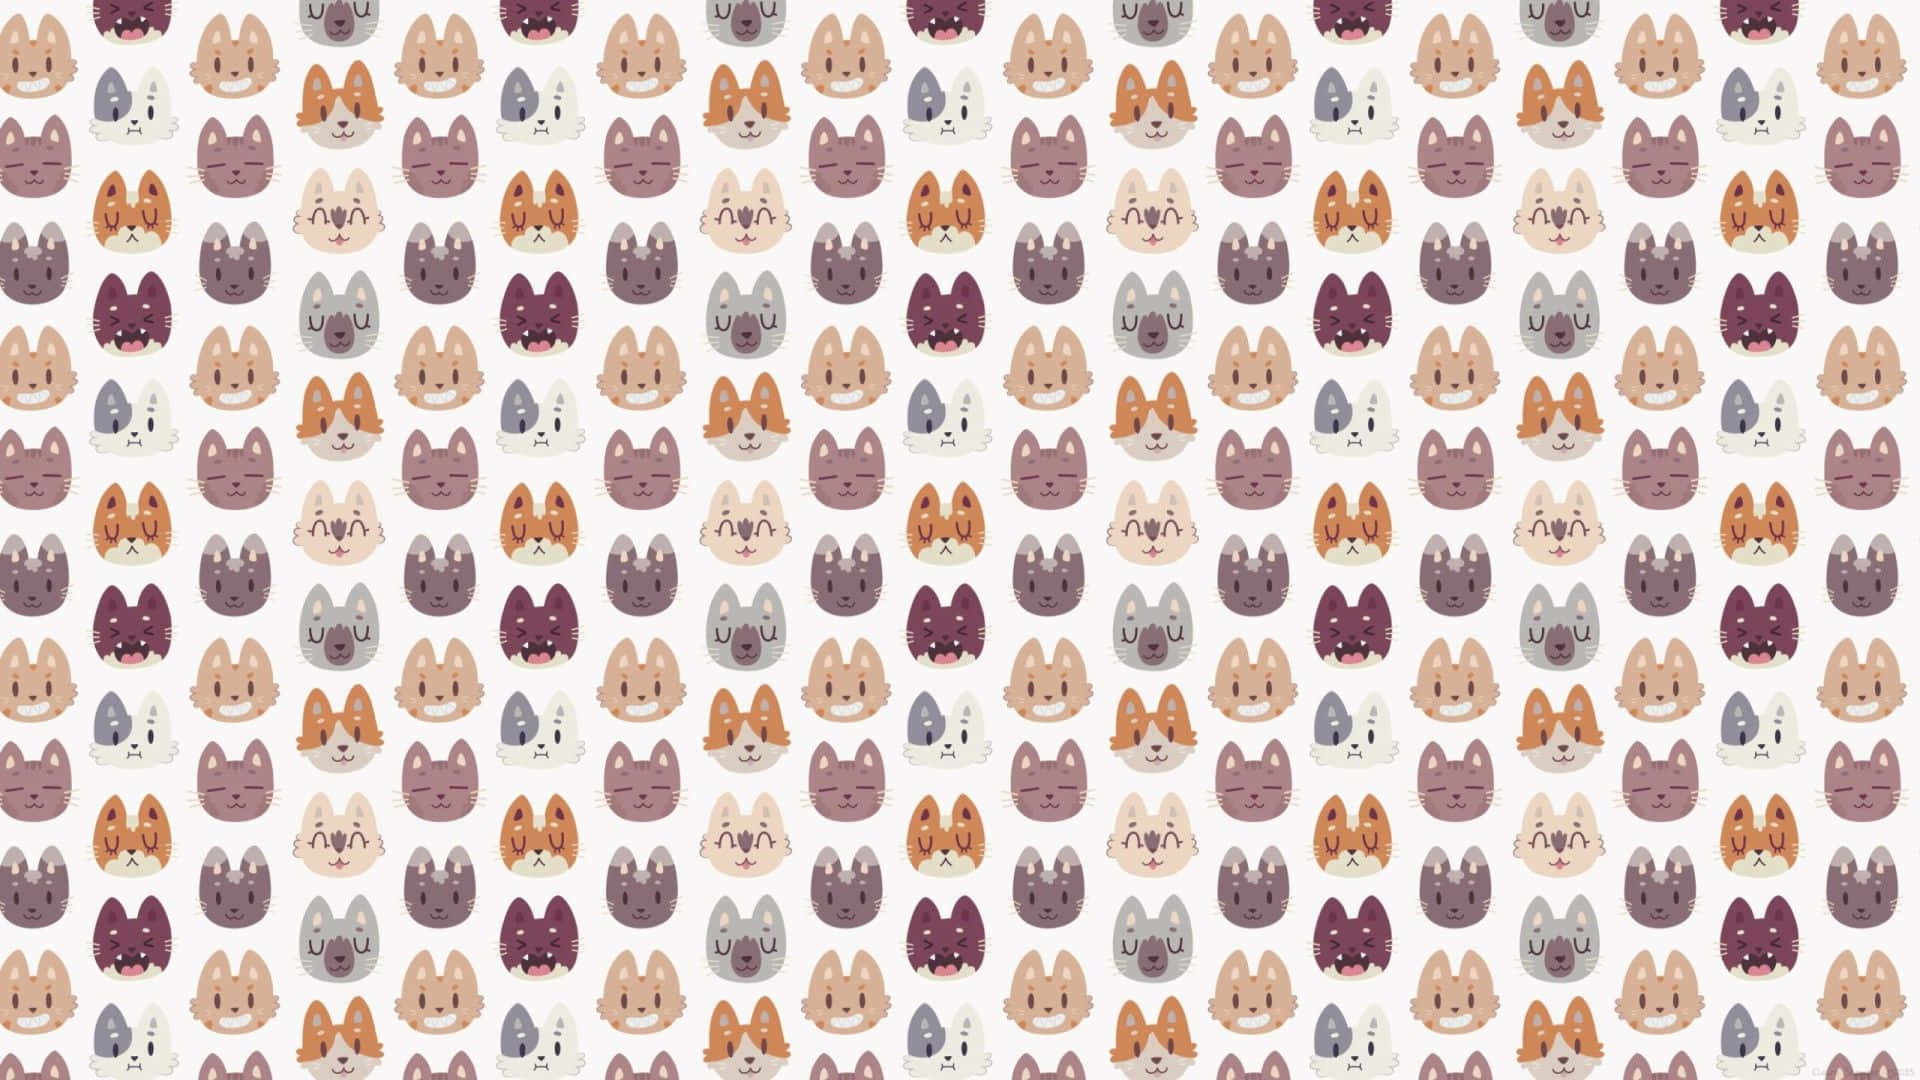 A Pattern Of Foxes With Orange And Brown Colors Wallpaper